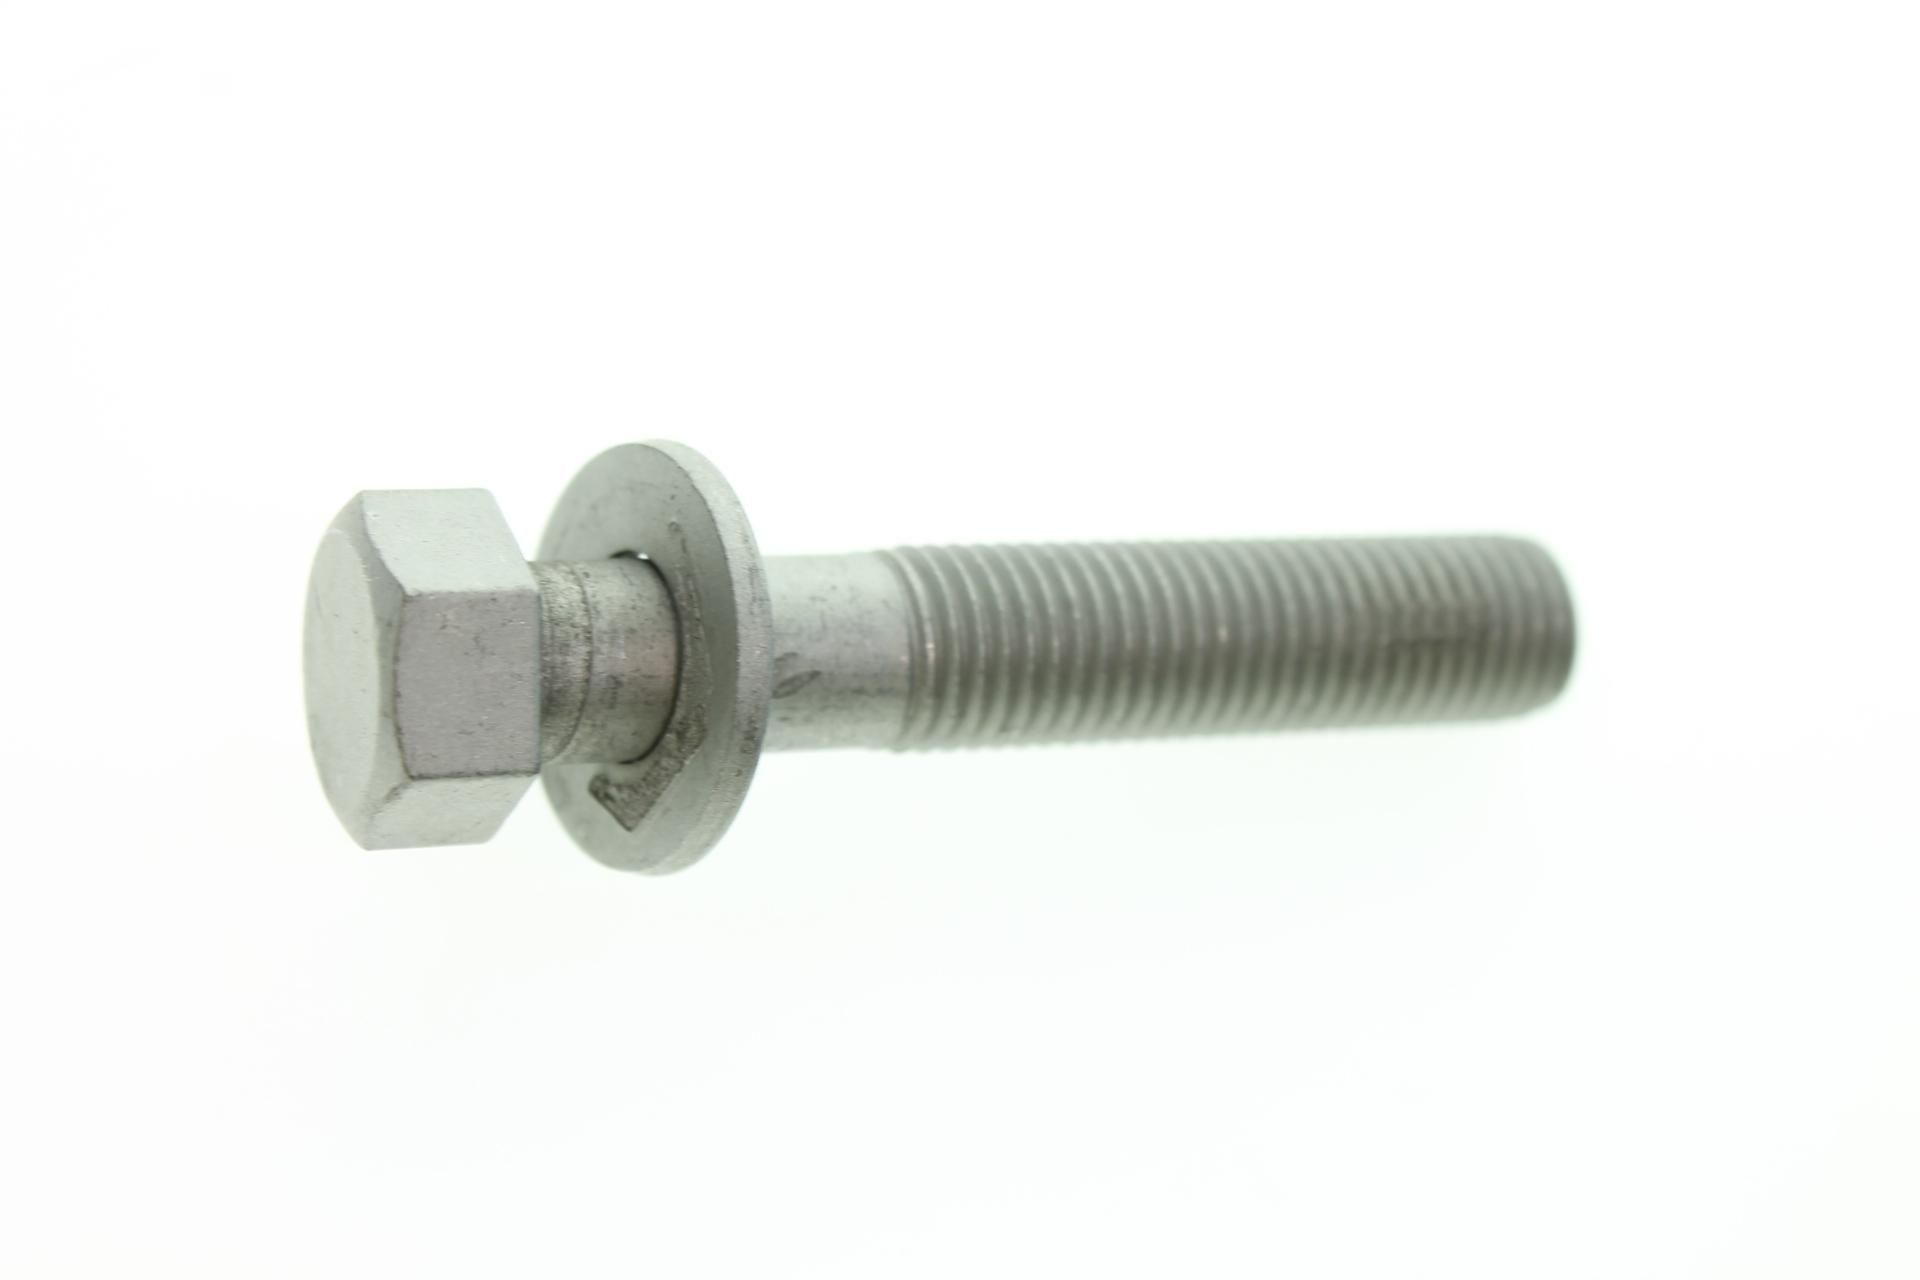 09117-10052 Superseded by 09116-10150 - BOLT,10X55